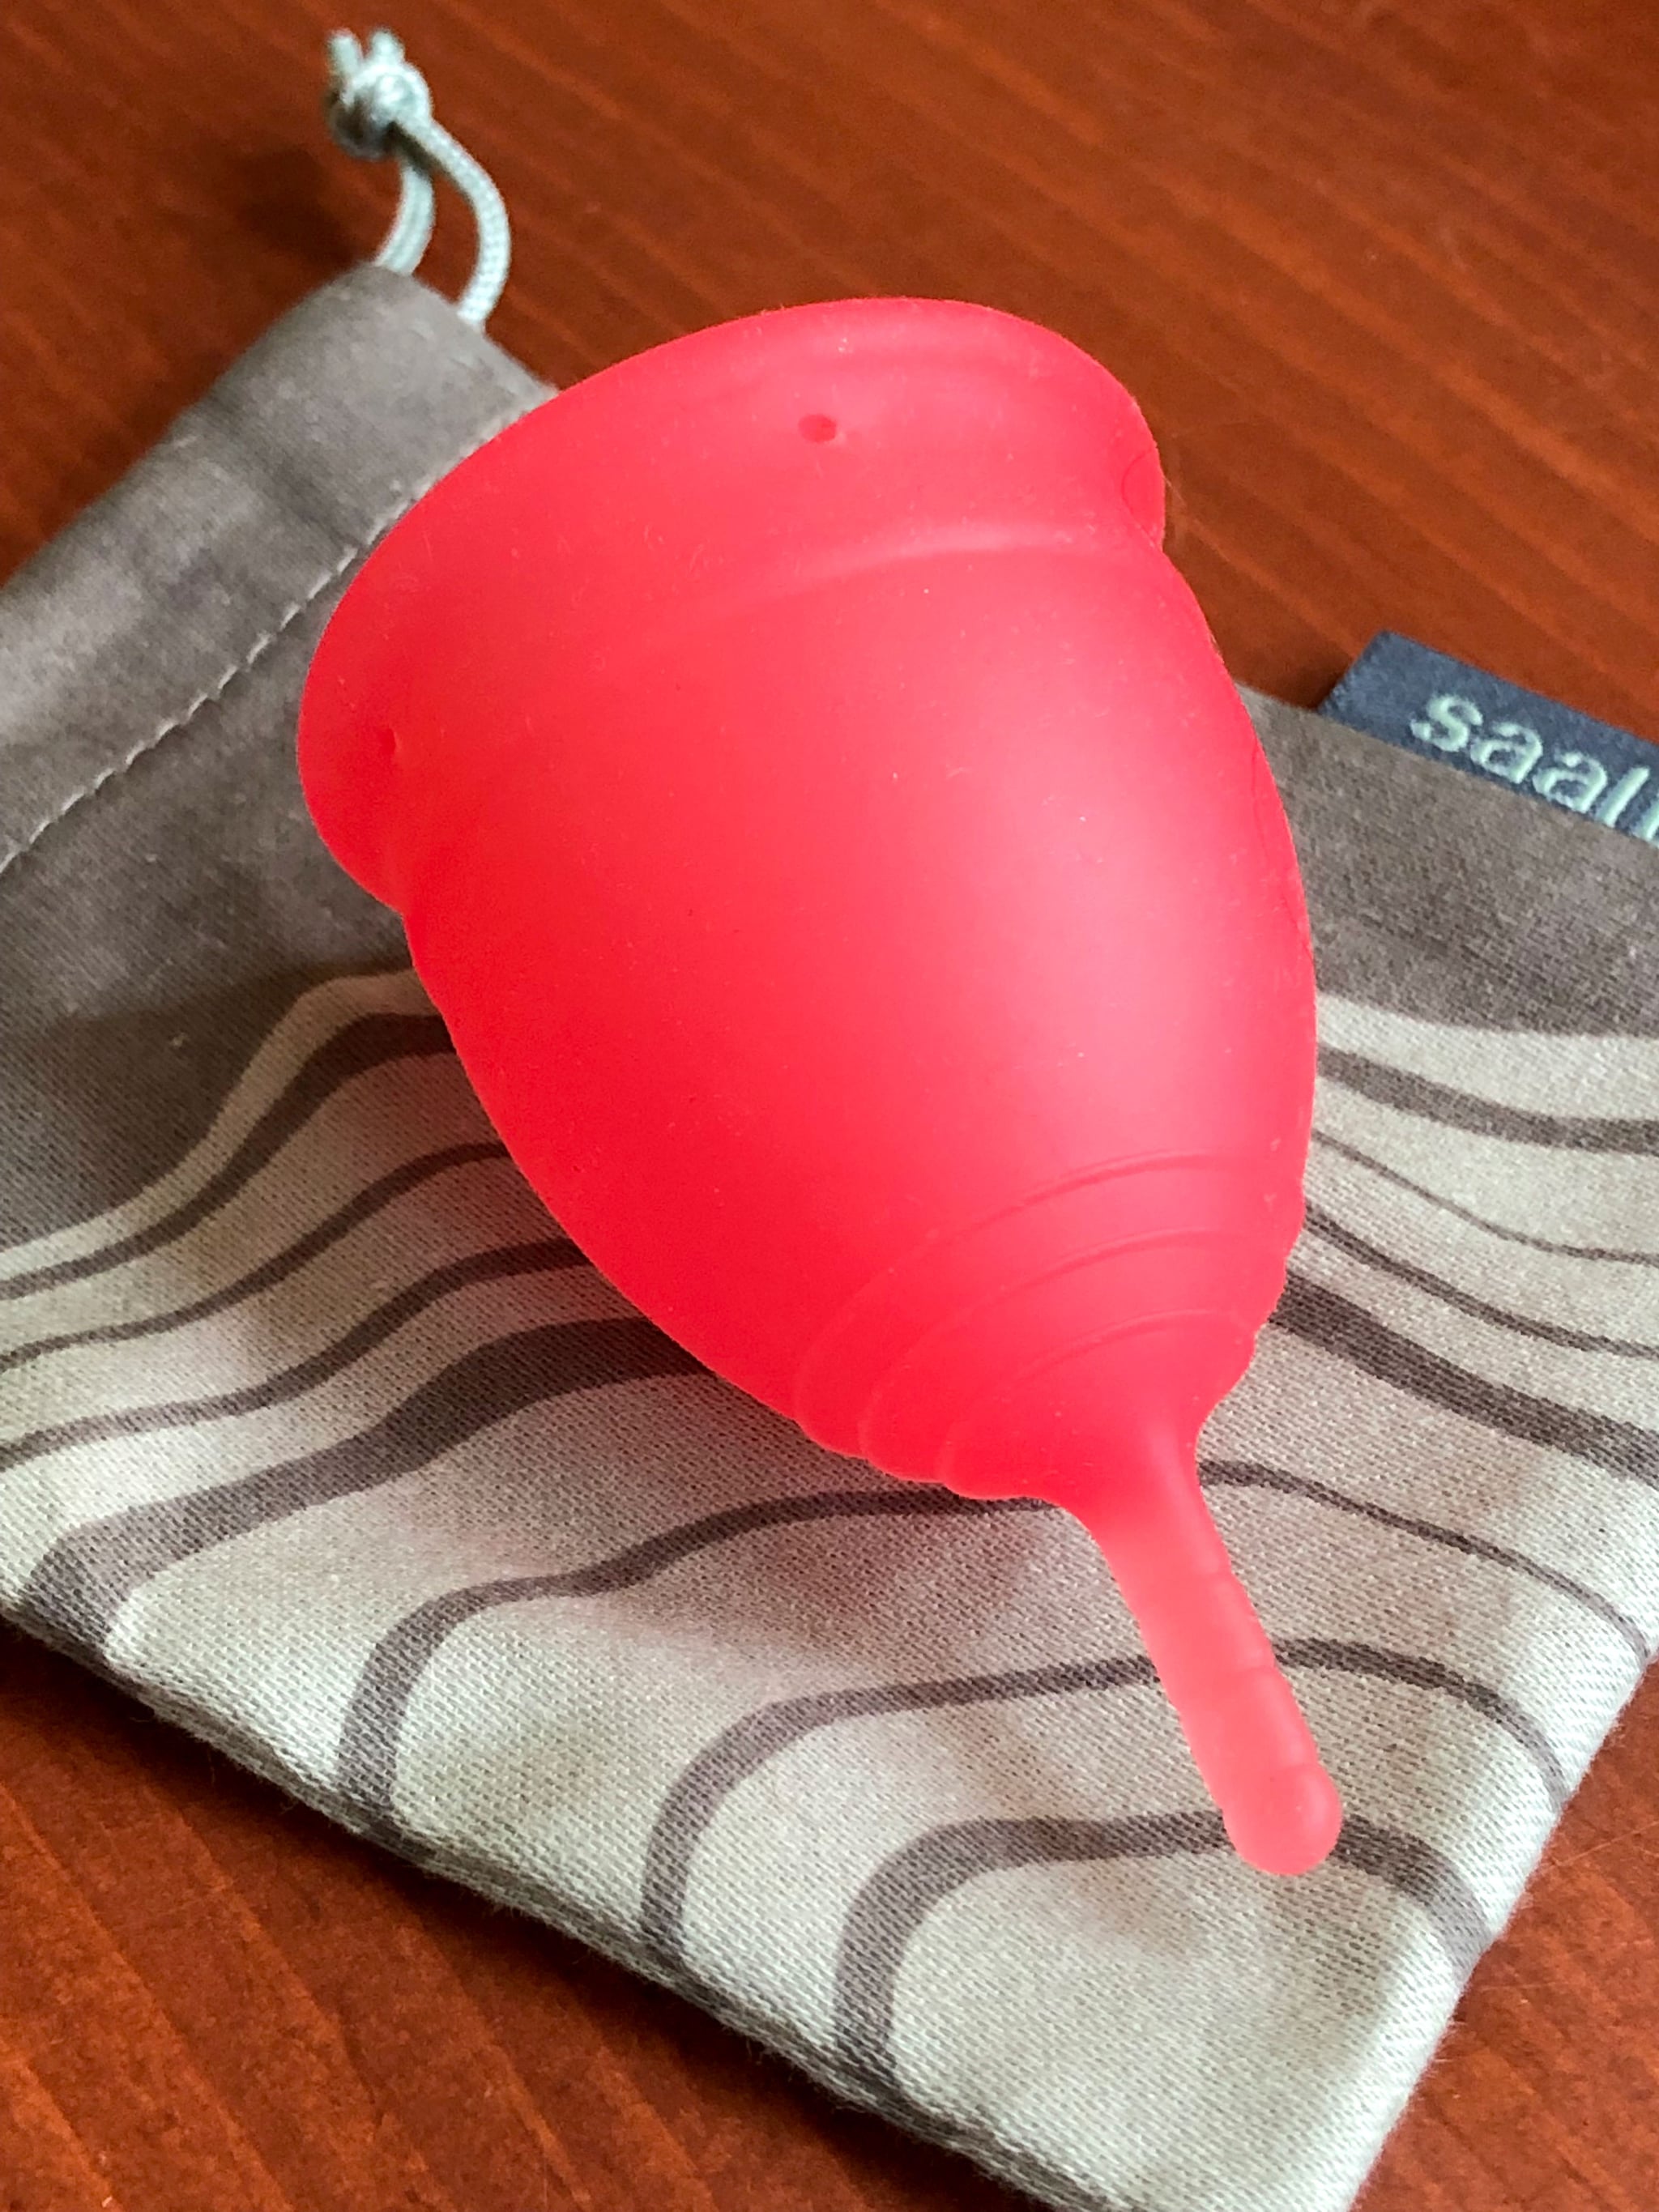 Menstrual cups to find where The 5